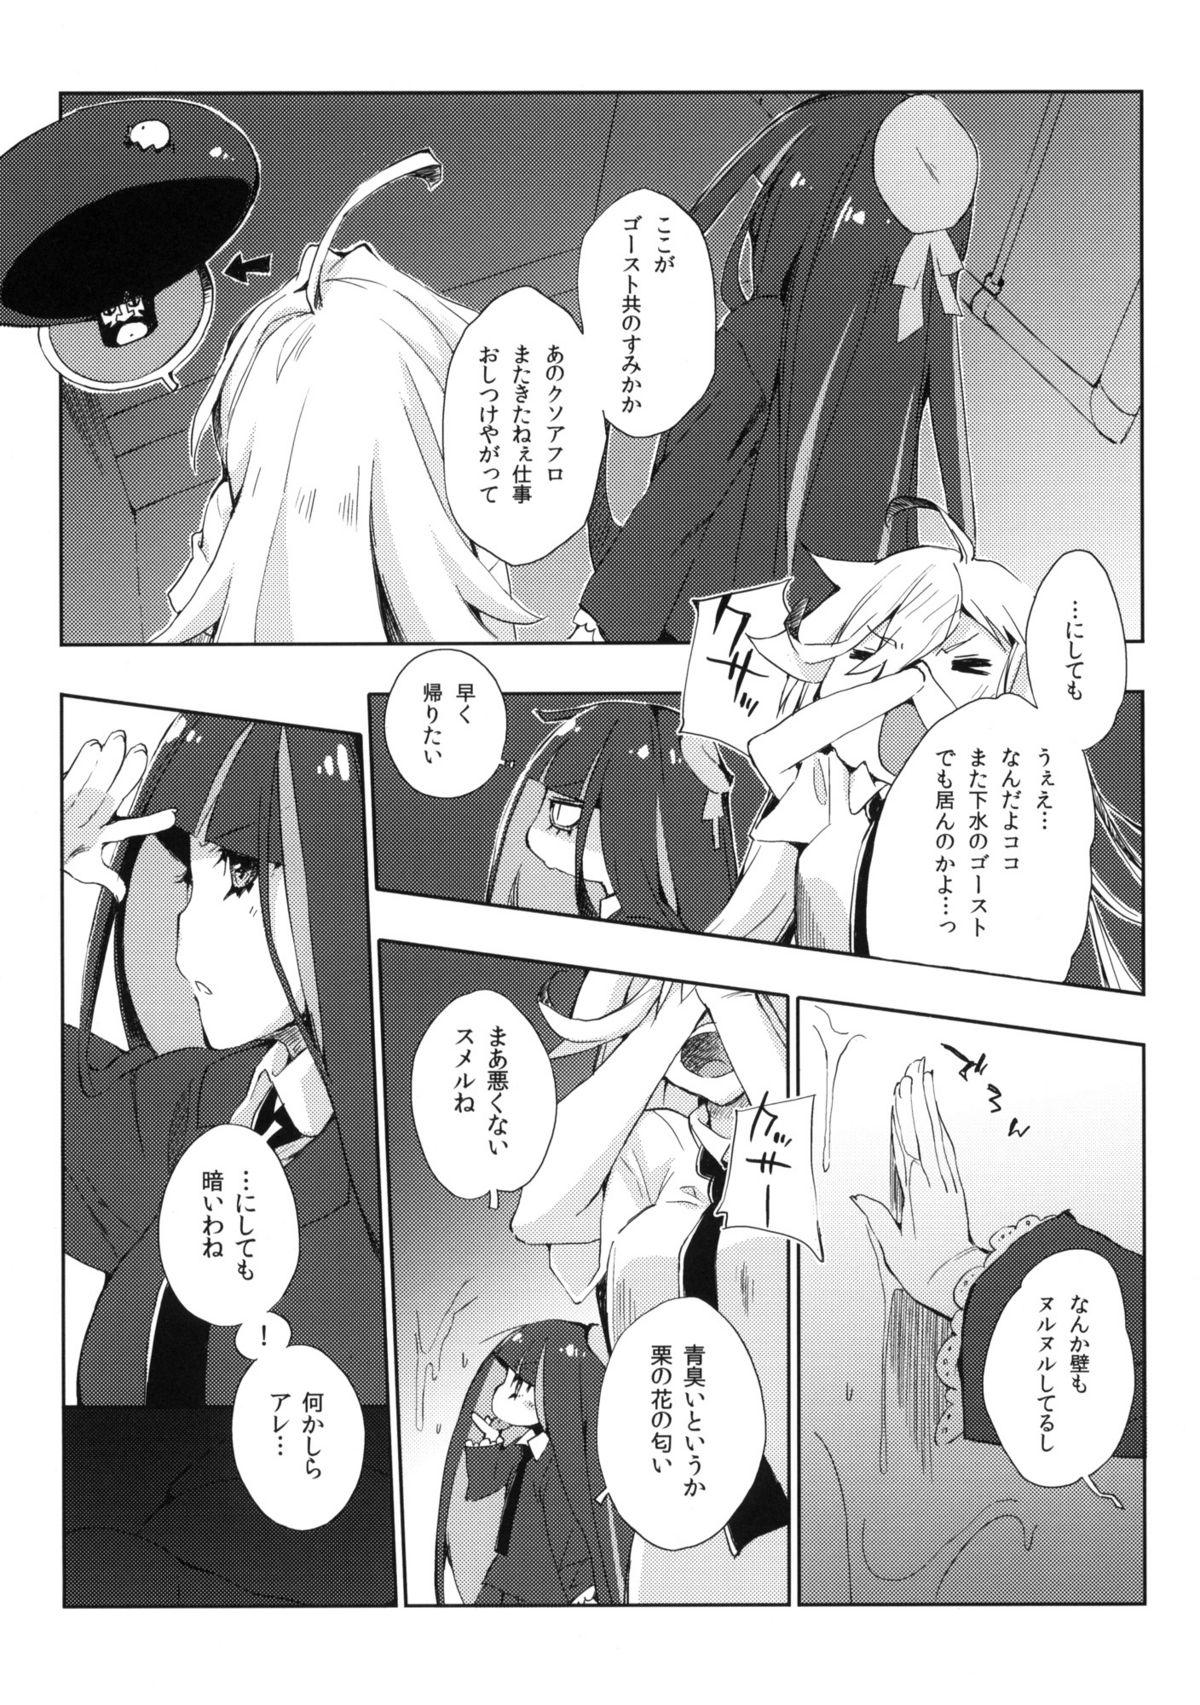 Uncut ¿inmoral unmoral? - Panty and stocking with garterbelt Cachonda - Page 4